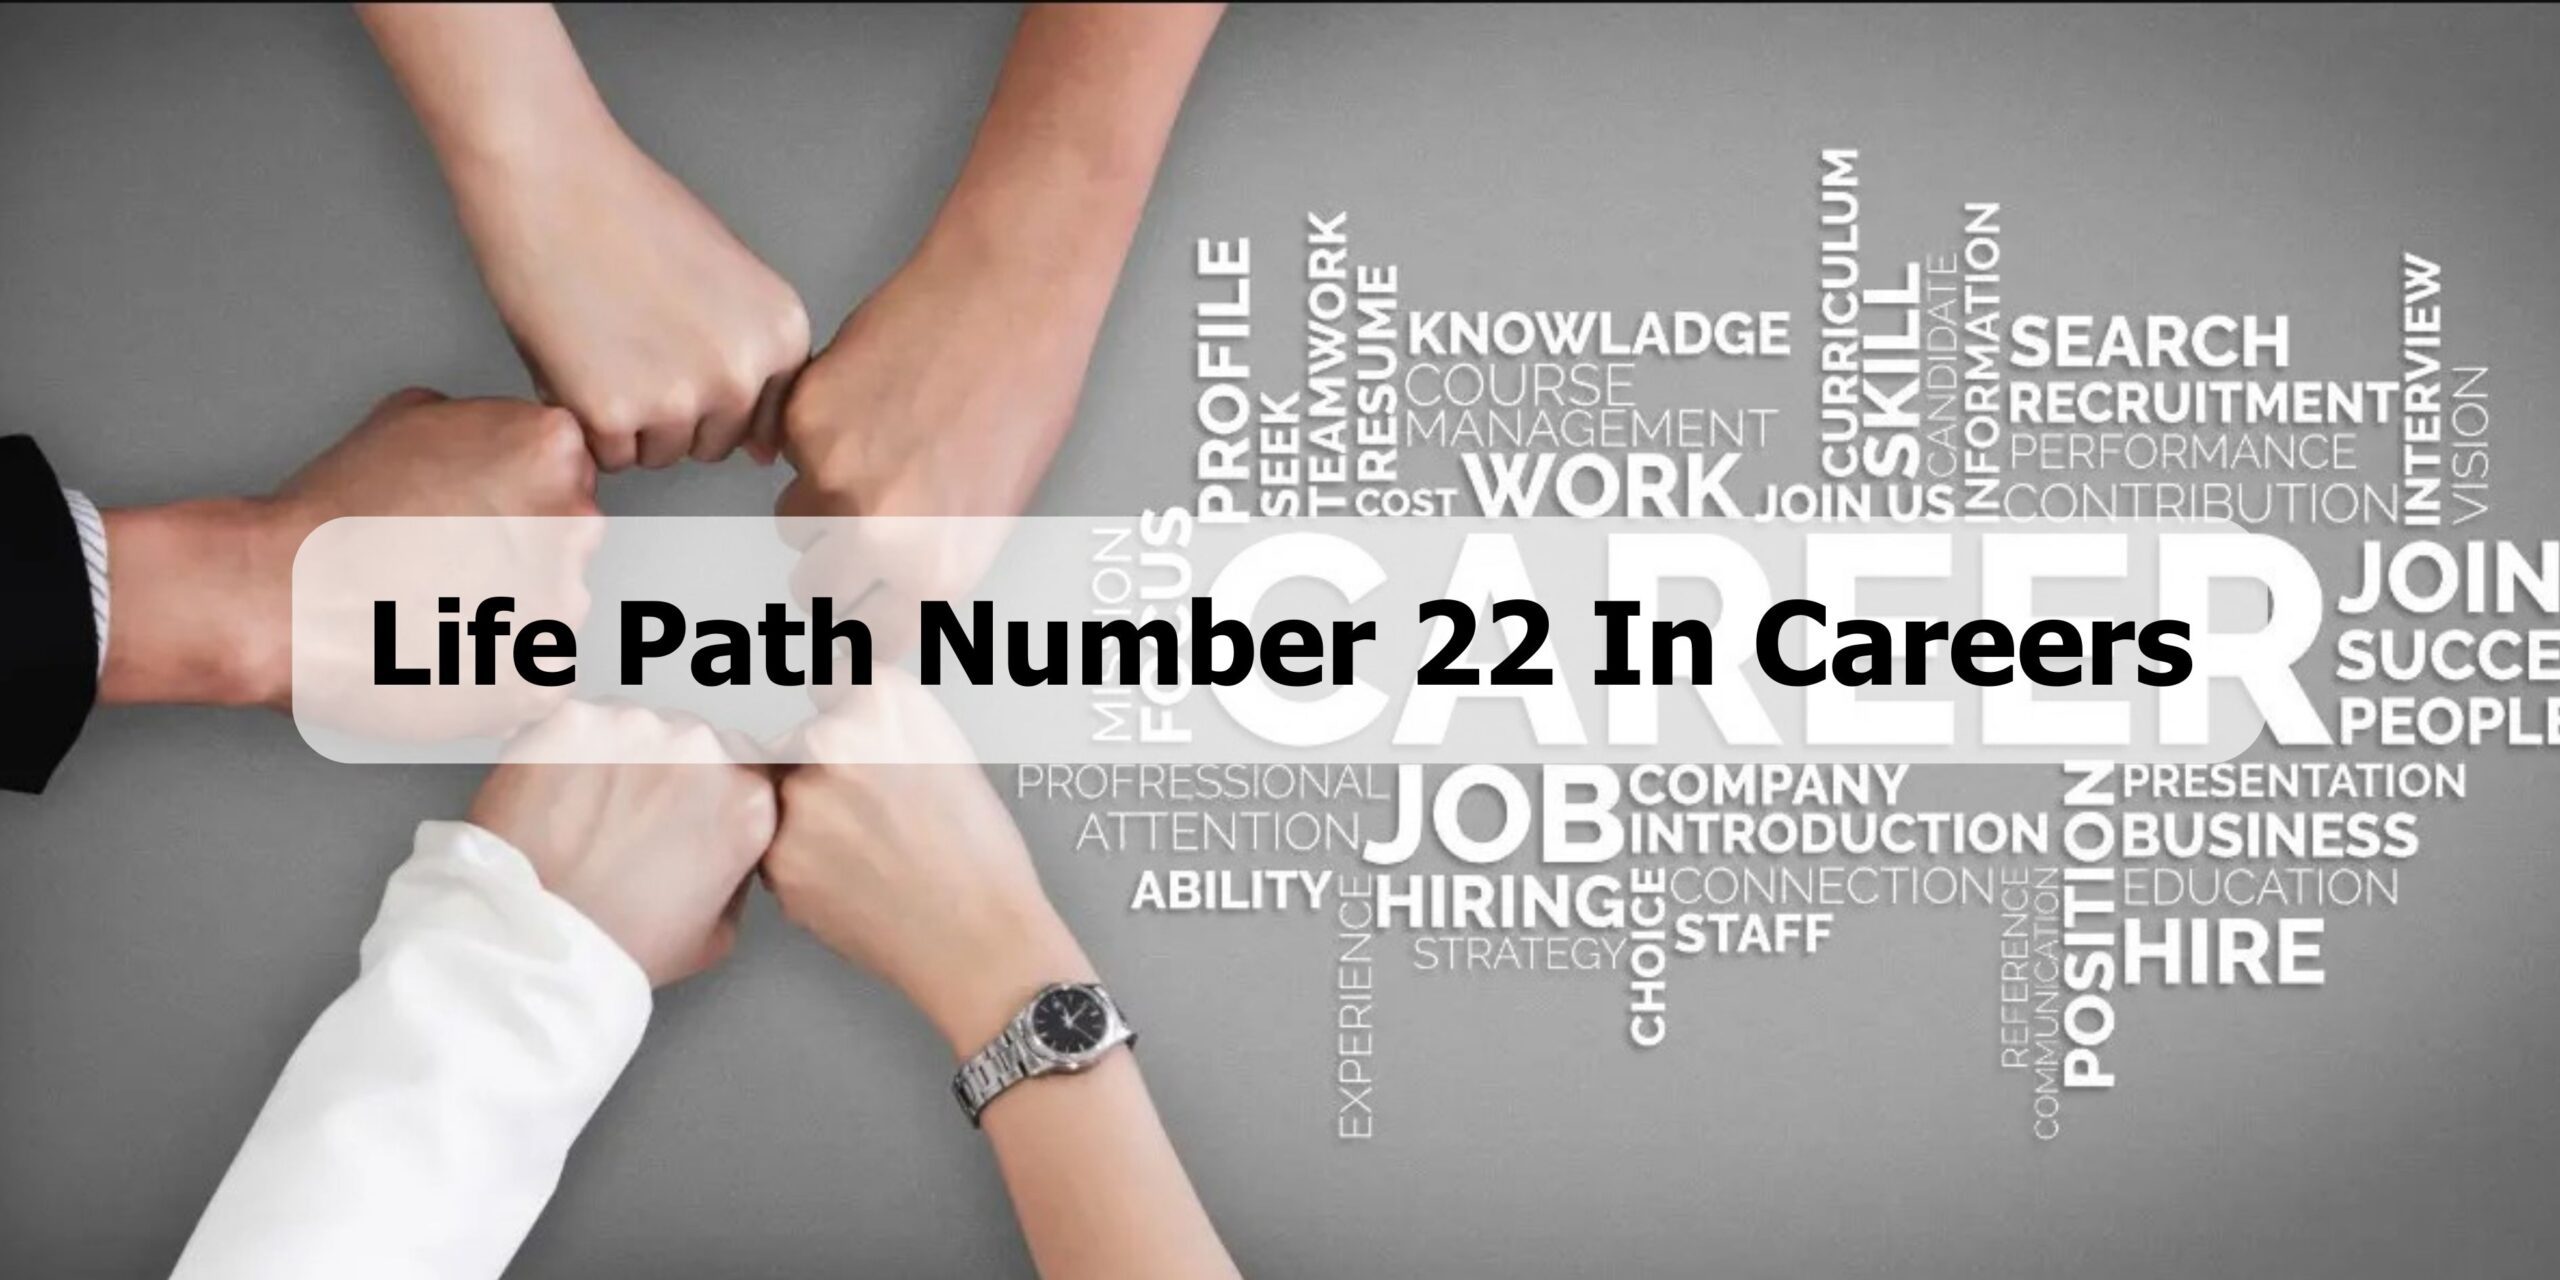 Life Path Number 22 in Careers